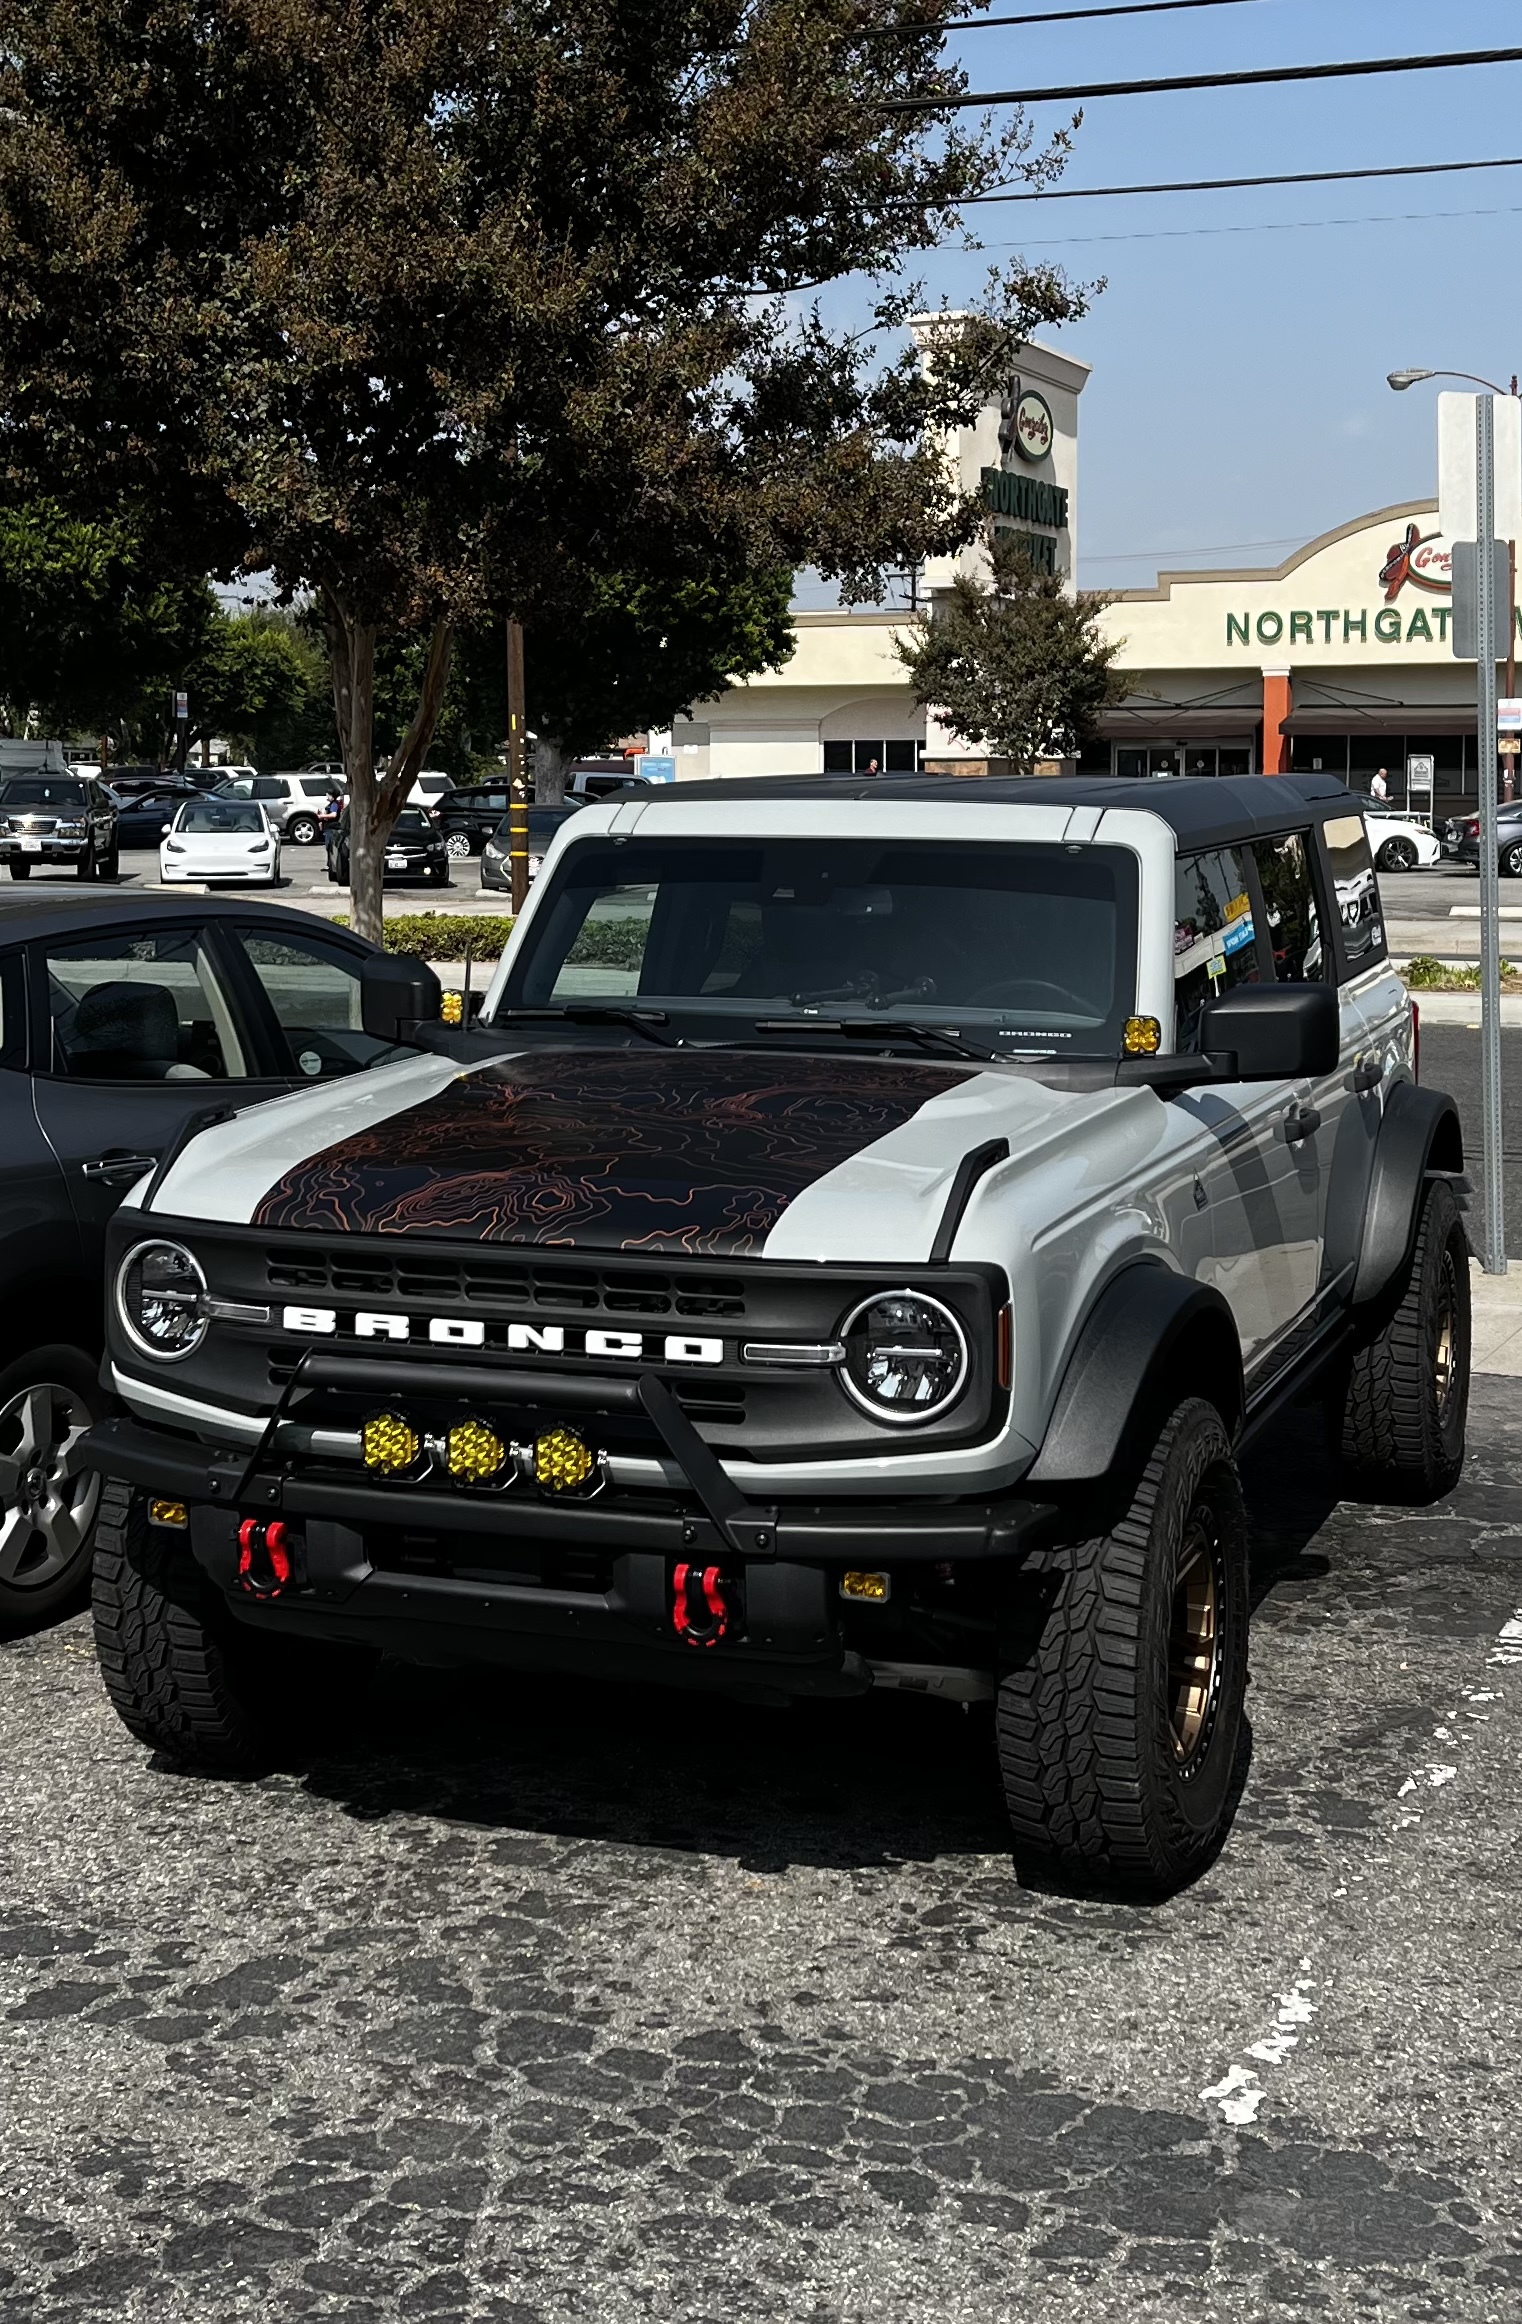 Ford Bronco Then & Now: show your assembly line Bronco and current Bronco picture 20220702_172919